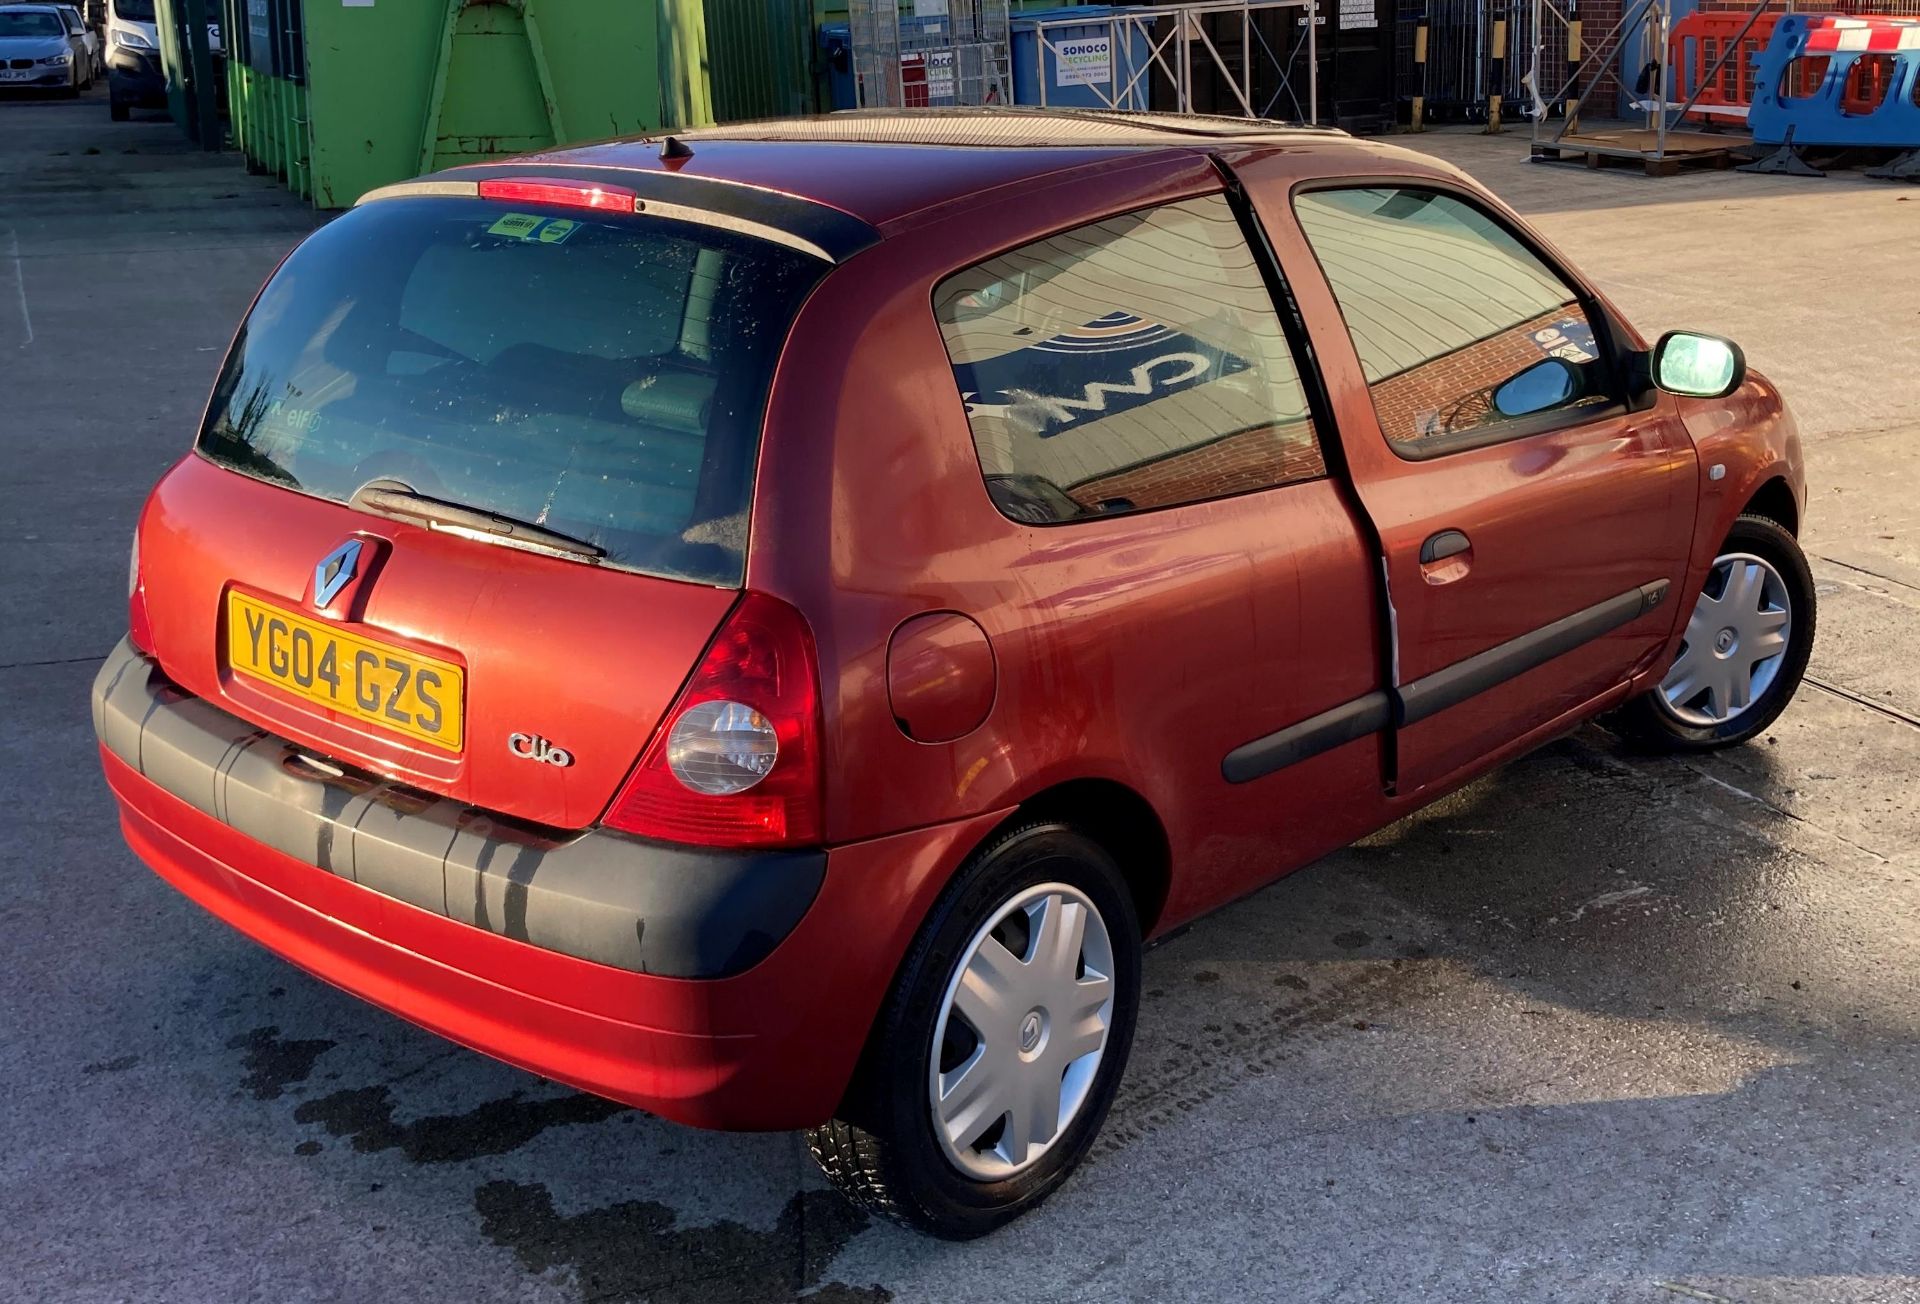 RENAULT CLIO EXPRESSION 16V (1149cc) THREE DOOR HATCHBACK - Petrol - Red. - Image 10 of 15